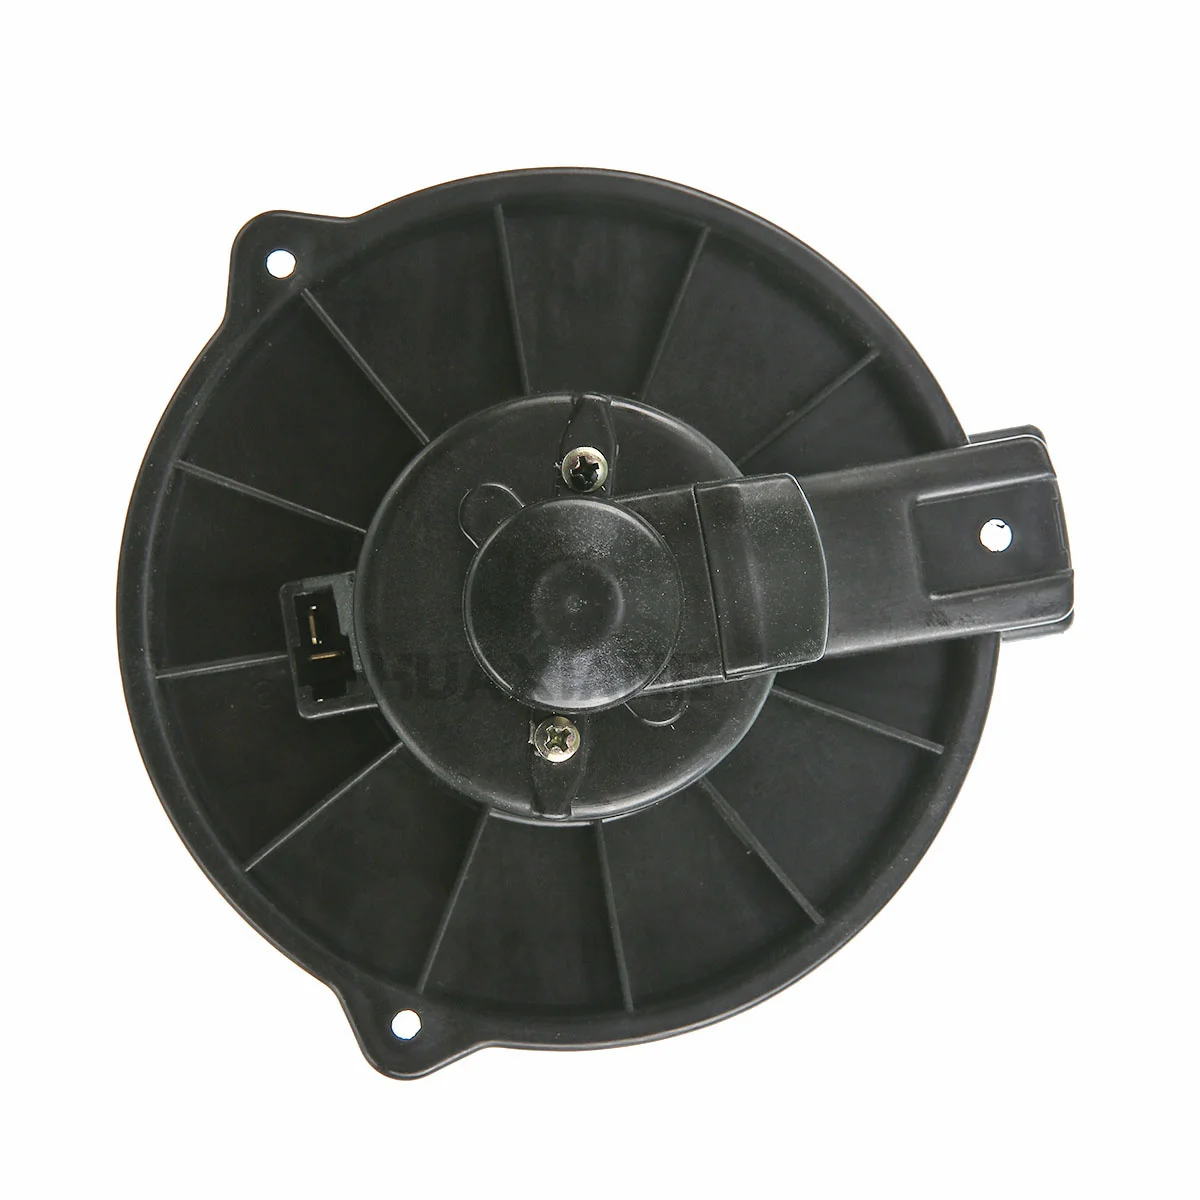 

US 72h Arrive A/C Heater Blower Motor with Cage for Mitsubishi Mirage 97-02 Plymouth Colt 93-94